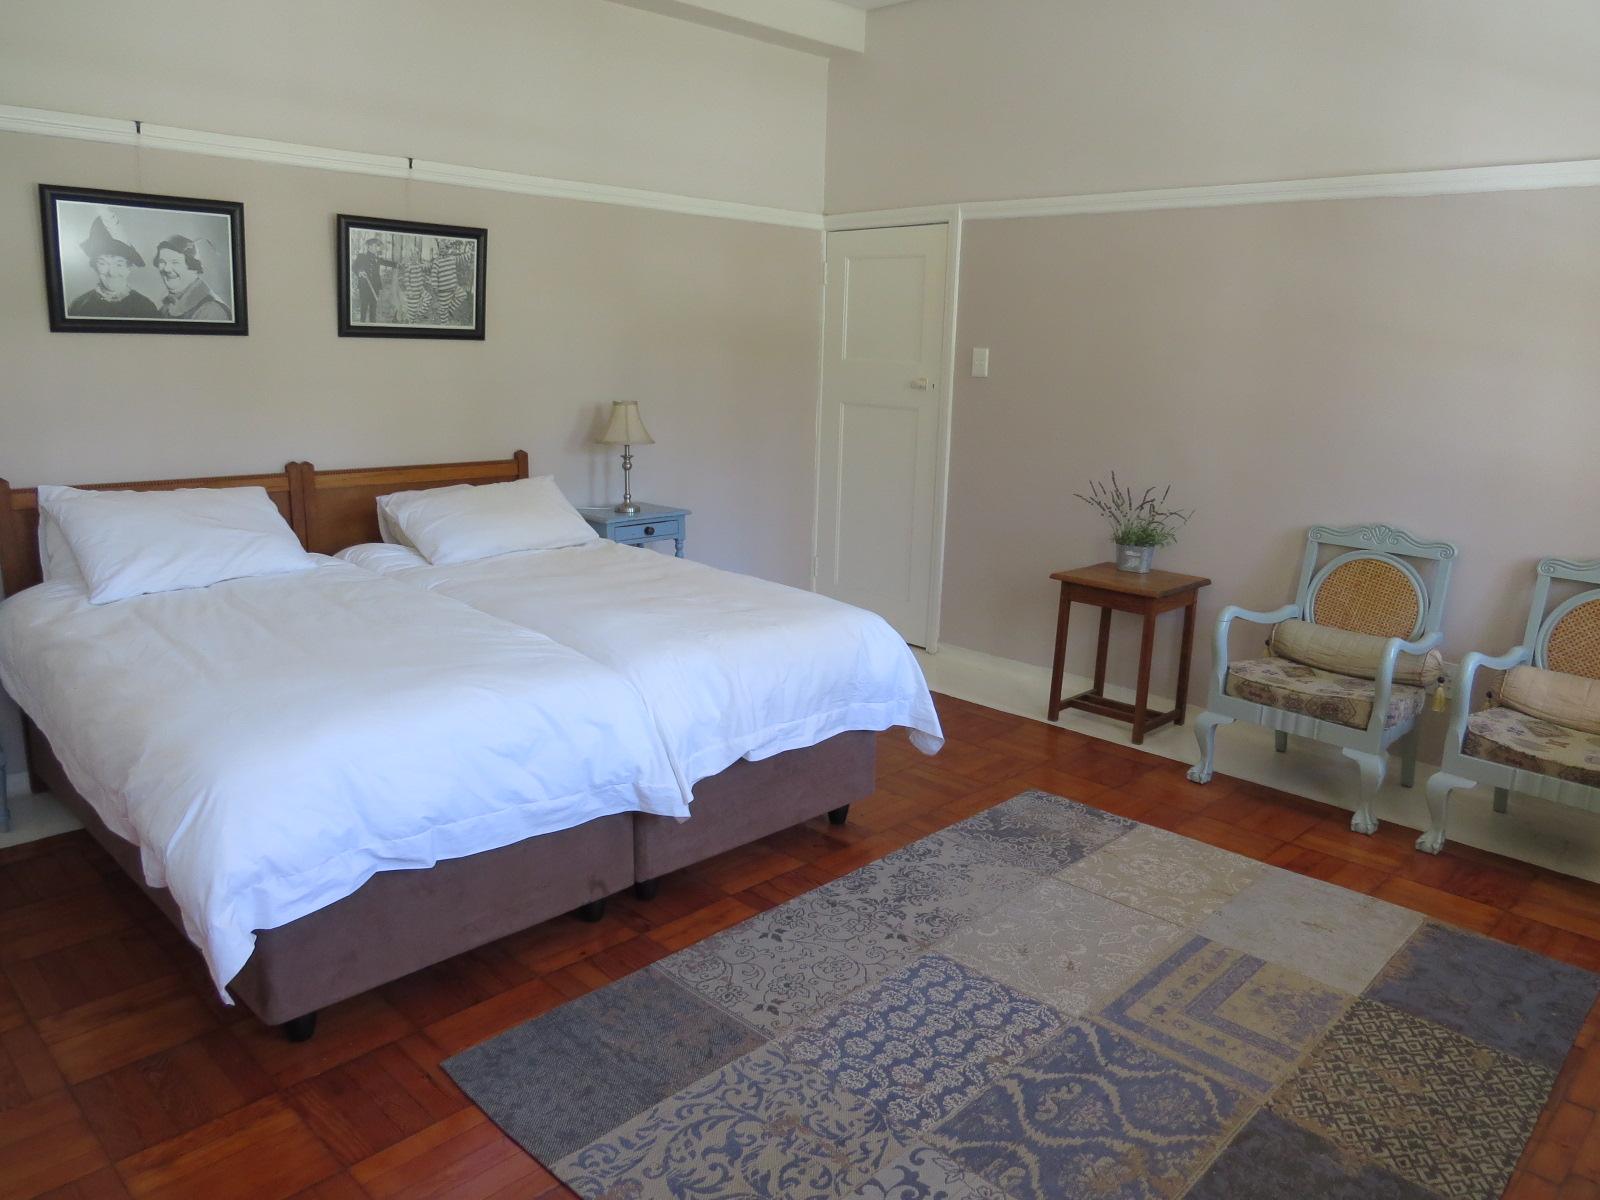 Photo 9 of Victoria Court accommodation in City Centre, Cape Town with 2 bedrooms and 1 bathrooms